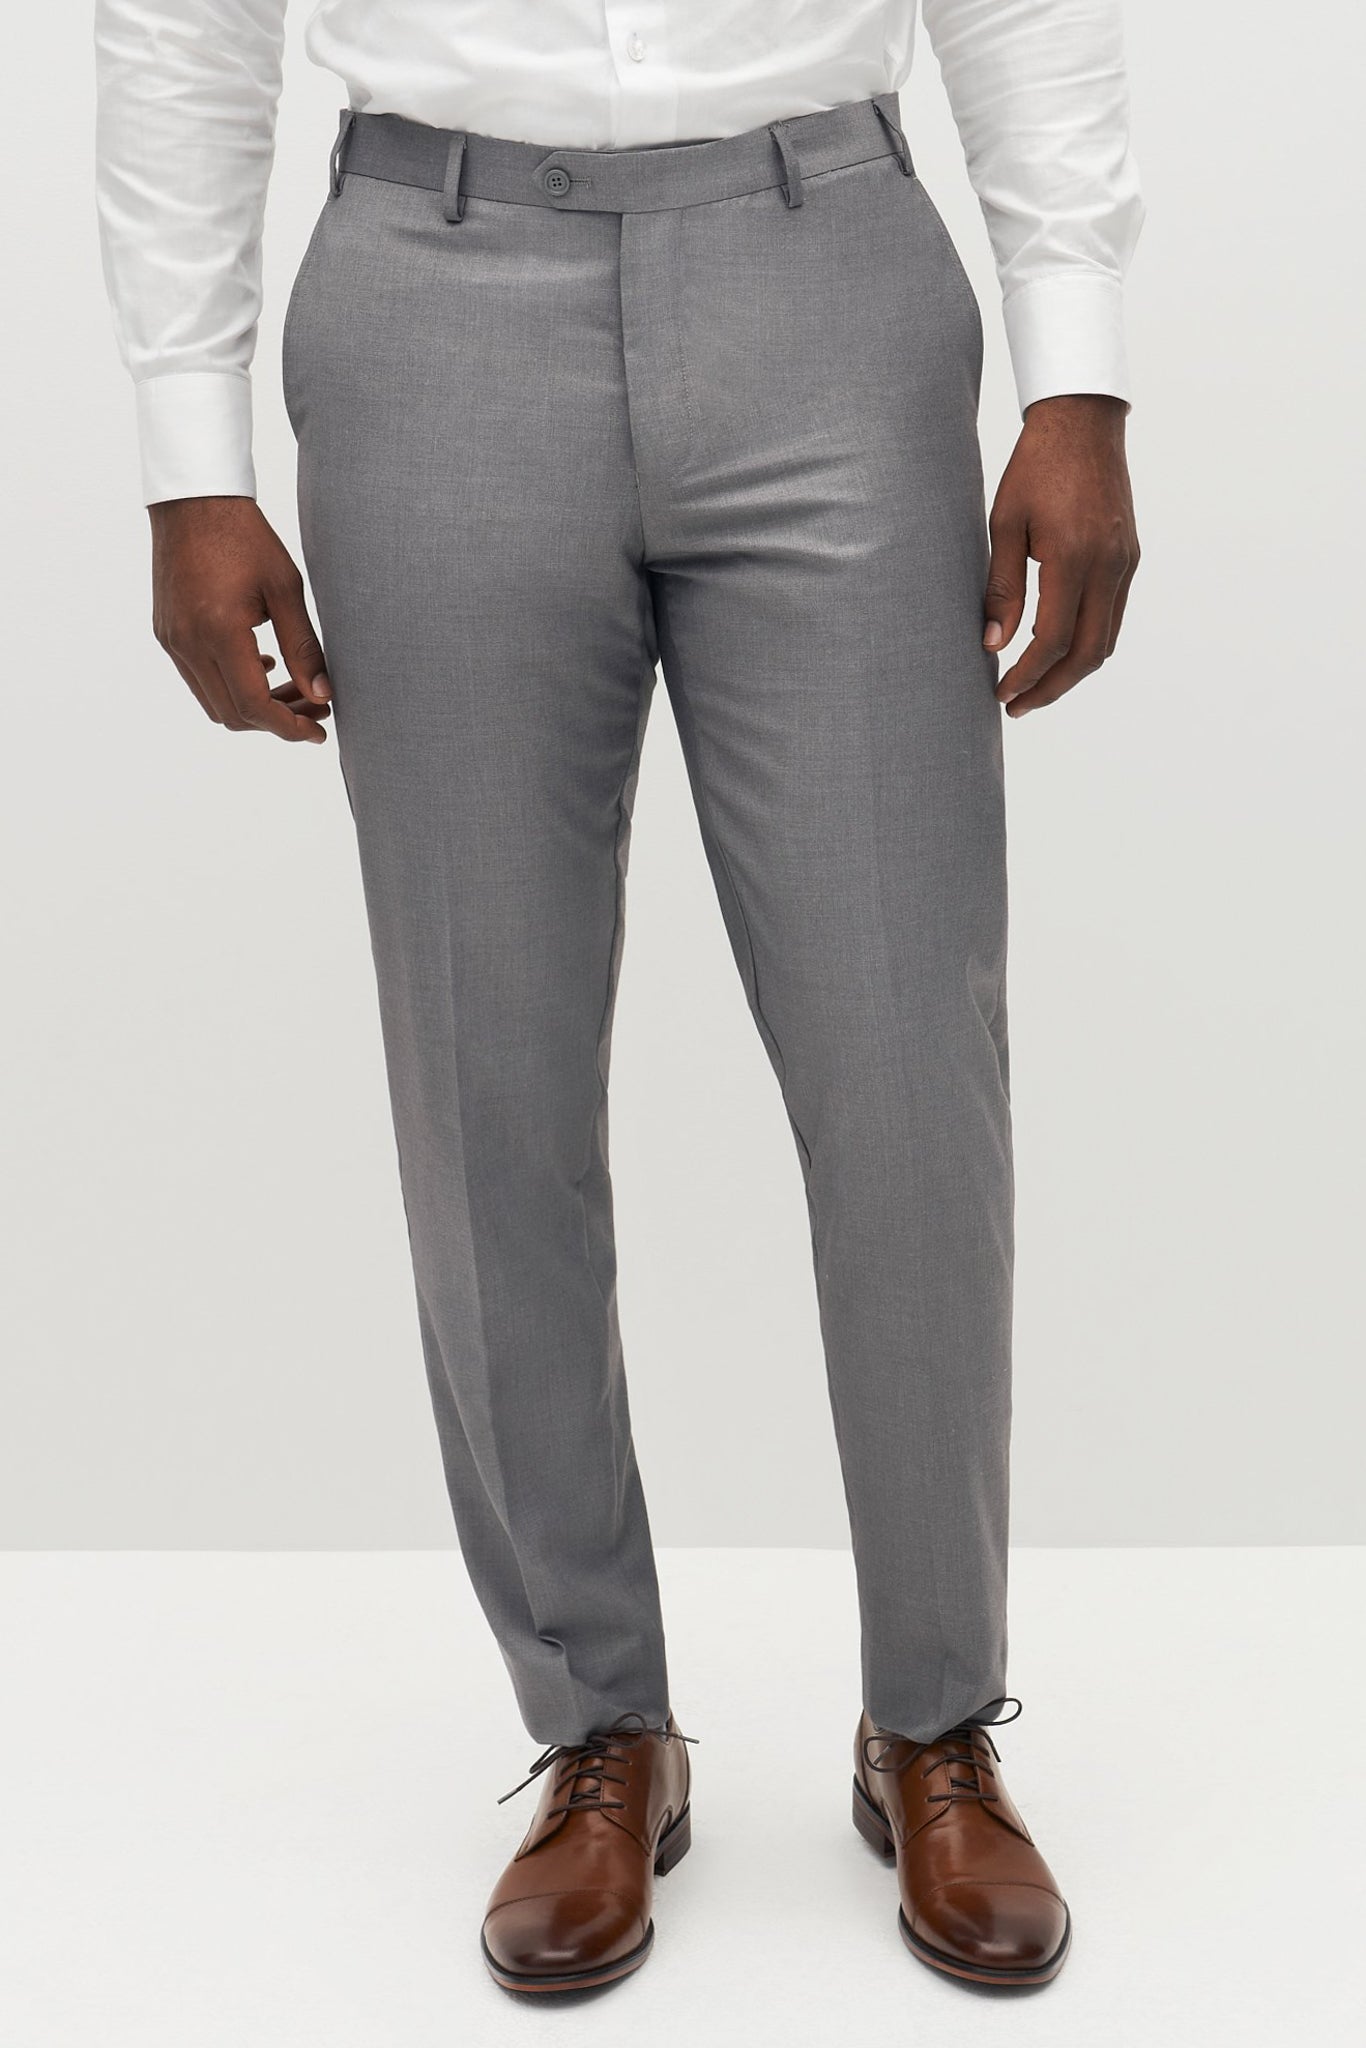 Buy SREY Grey Men's Combo Slim Fit Office wear Formal Trousers/Pant (Pack  of 2) at Amazon.in